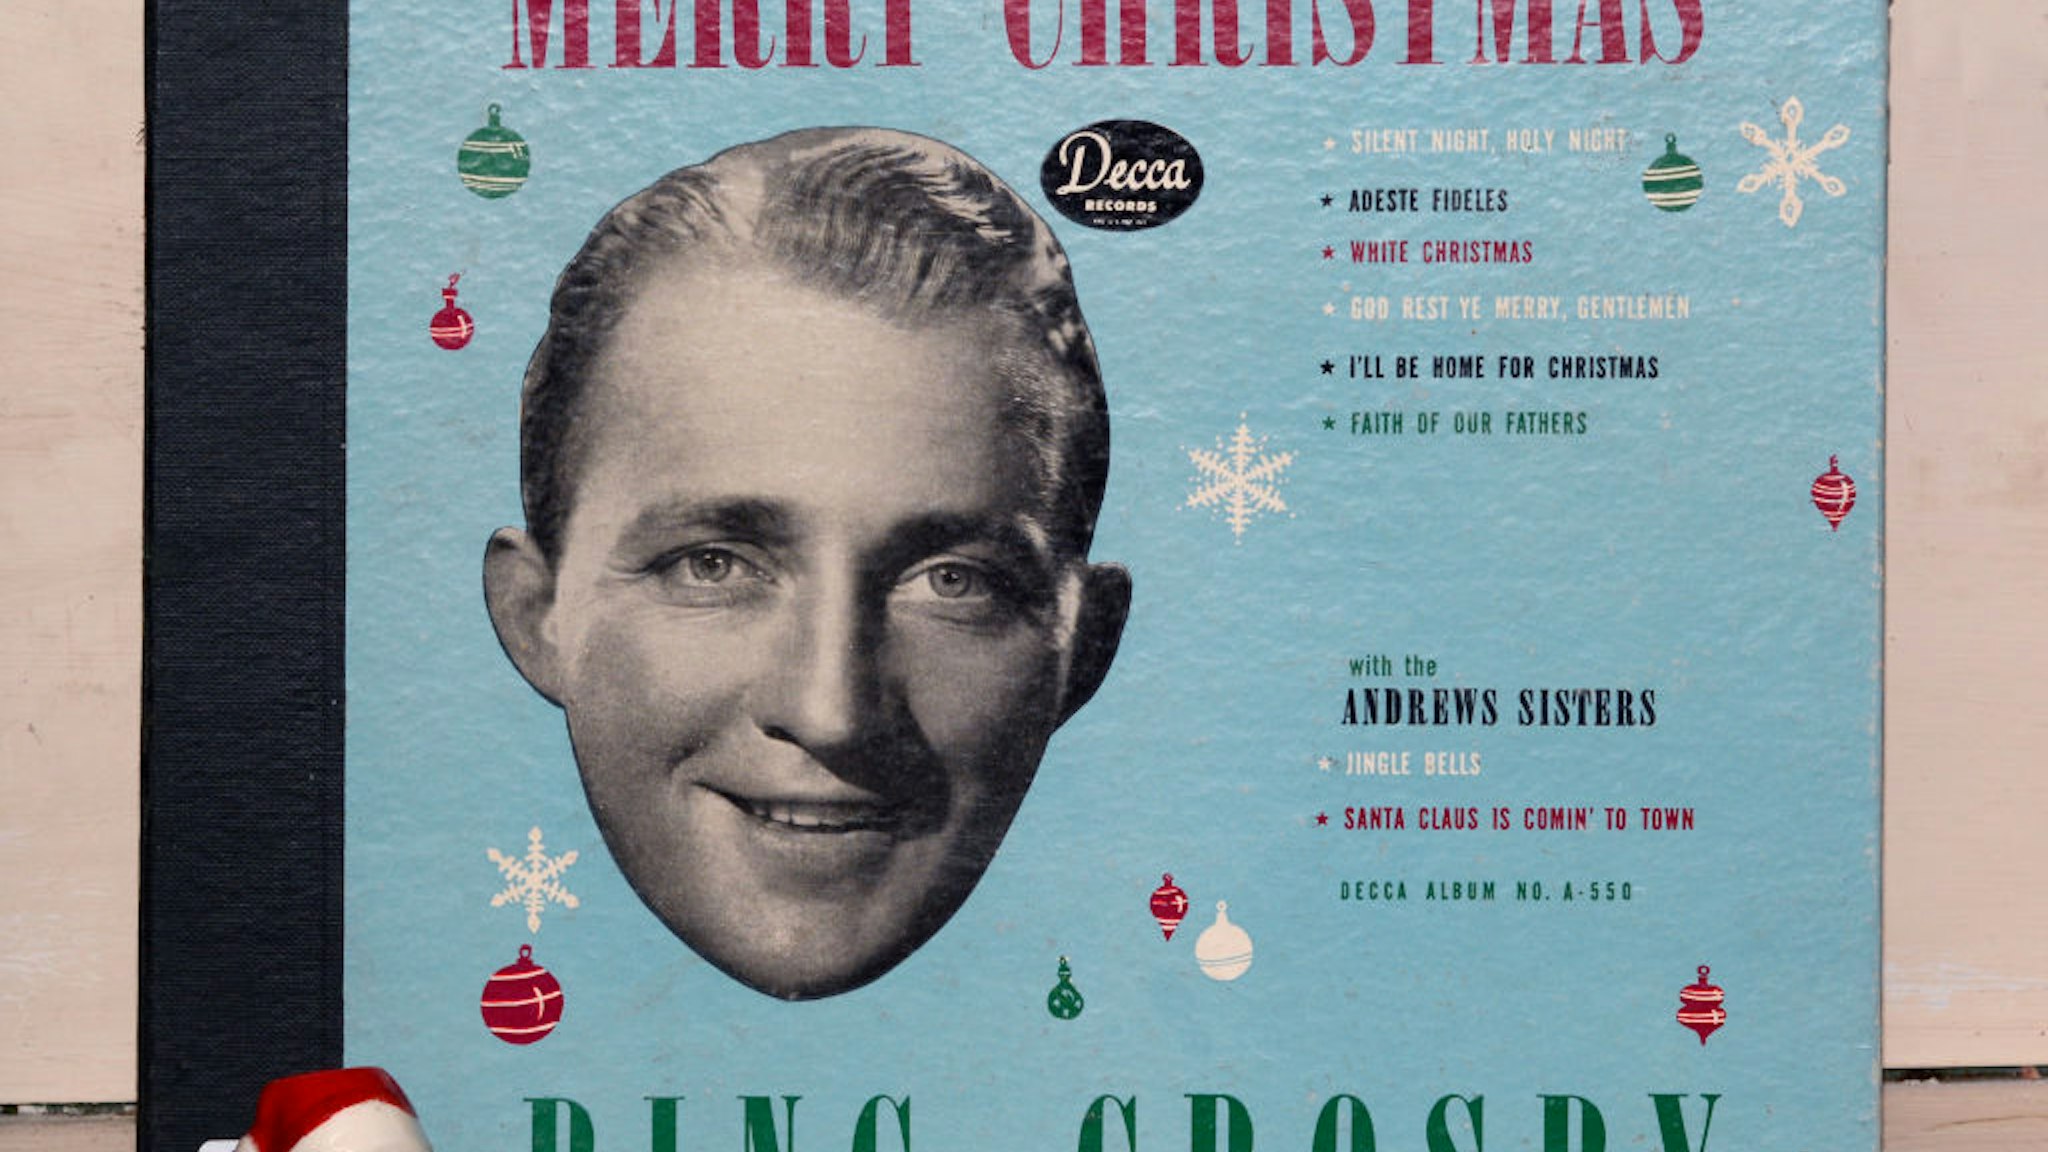 A copy of singer Bing Crosby's 1945 Decca label album 'Merry Christmas' for sale in an antique shop in Santa Fe, New Mexico.